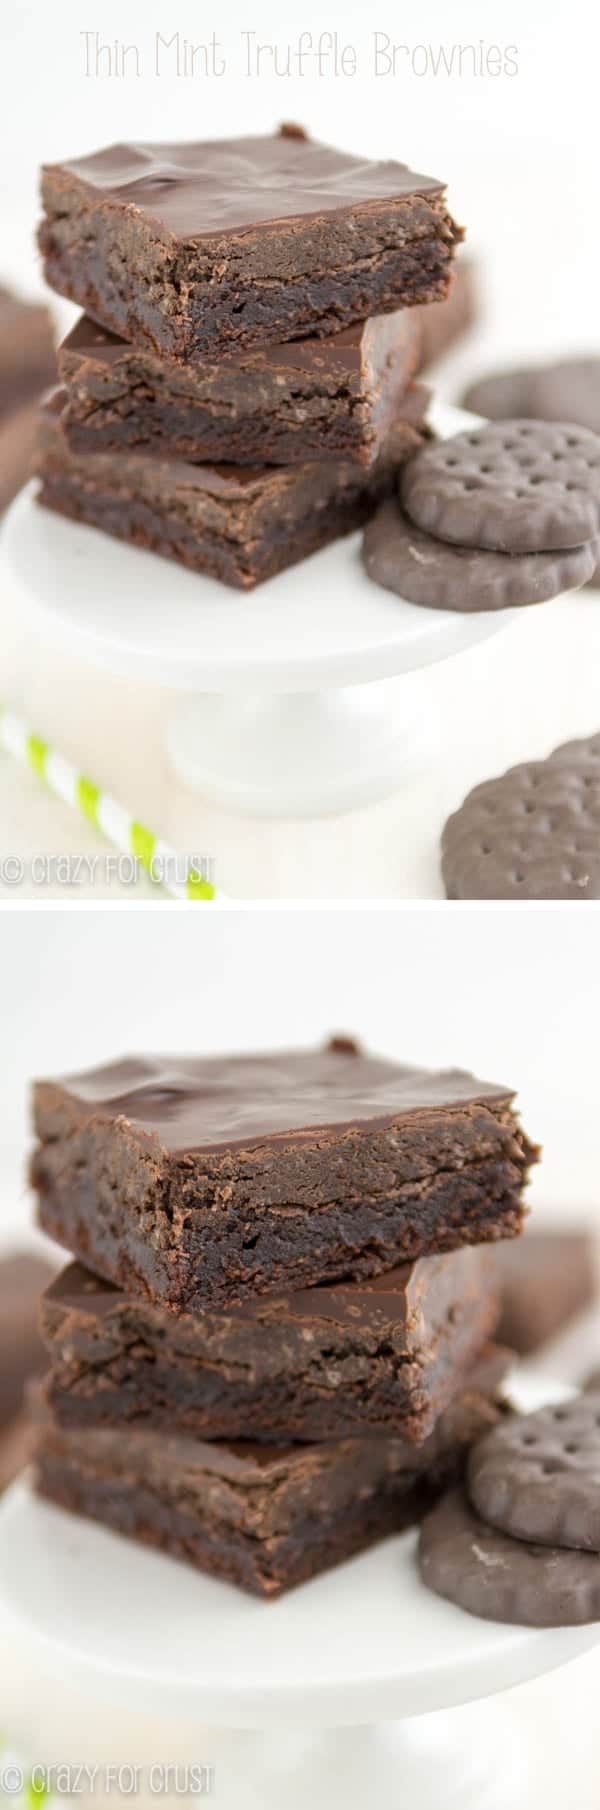 Photo collage of Thin Mint Truffle Brownies stacked on eachother with thin mint cookies next to them